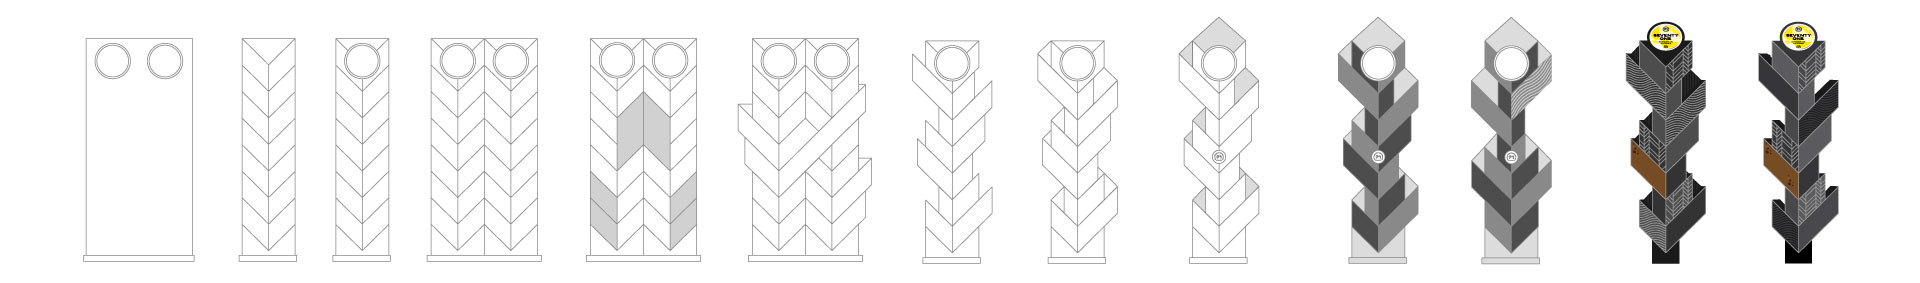 Series of sketches and illustrations detailing the design and development of custom beer taps. Sharp and angular in style with beer logos on top.